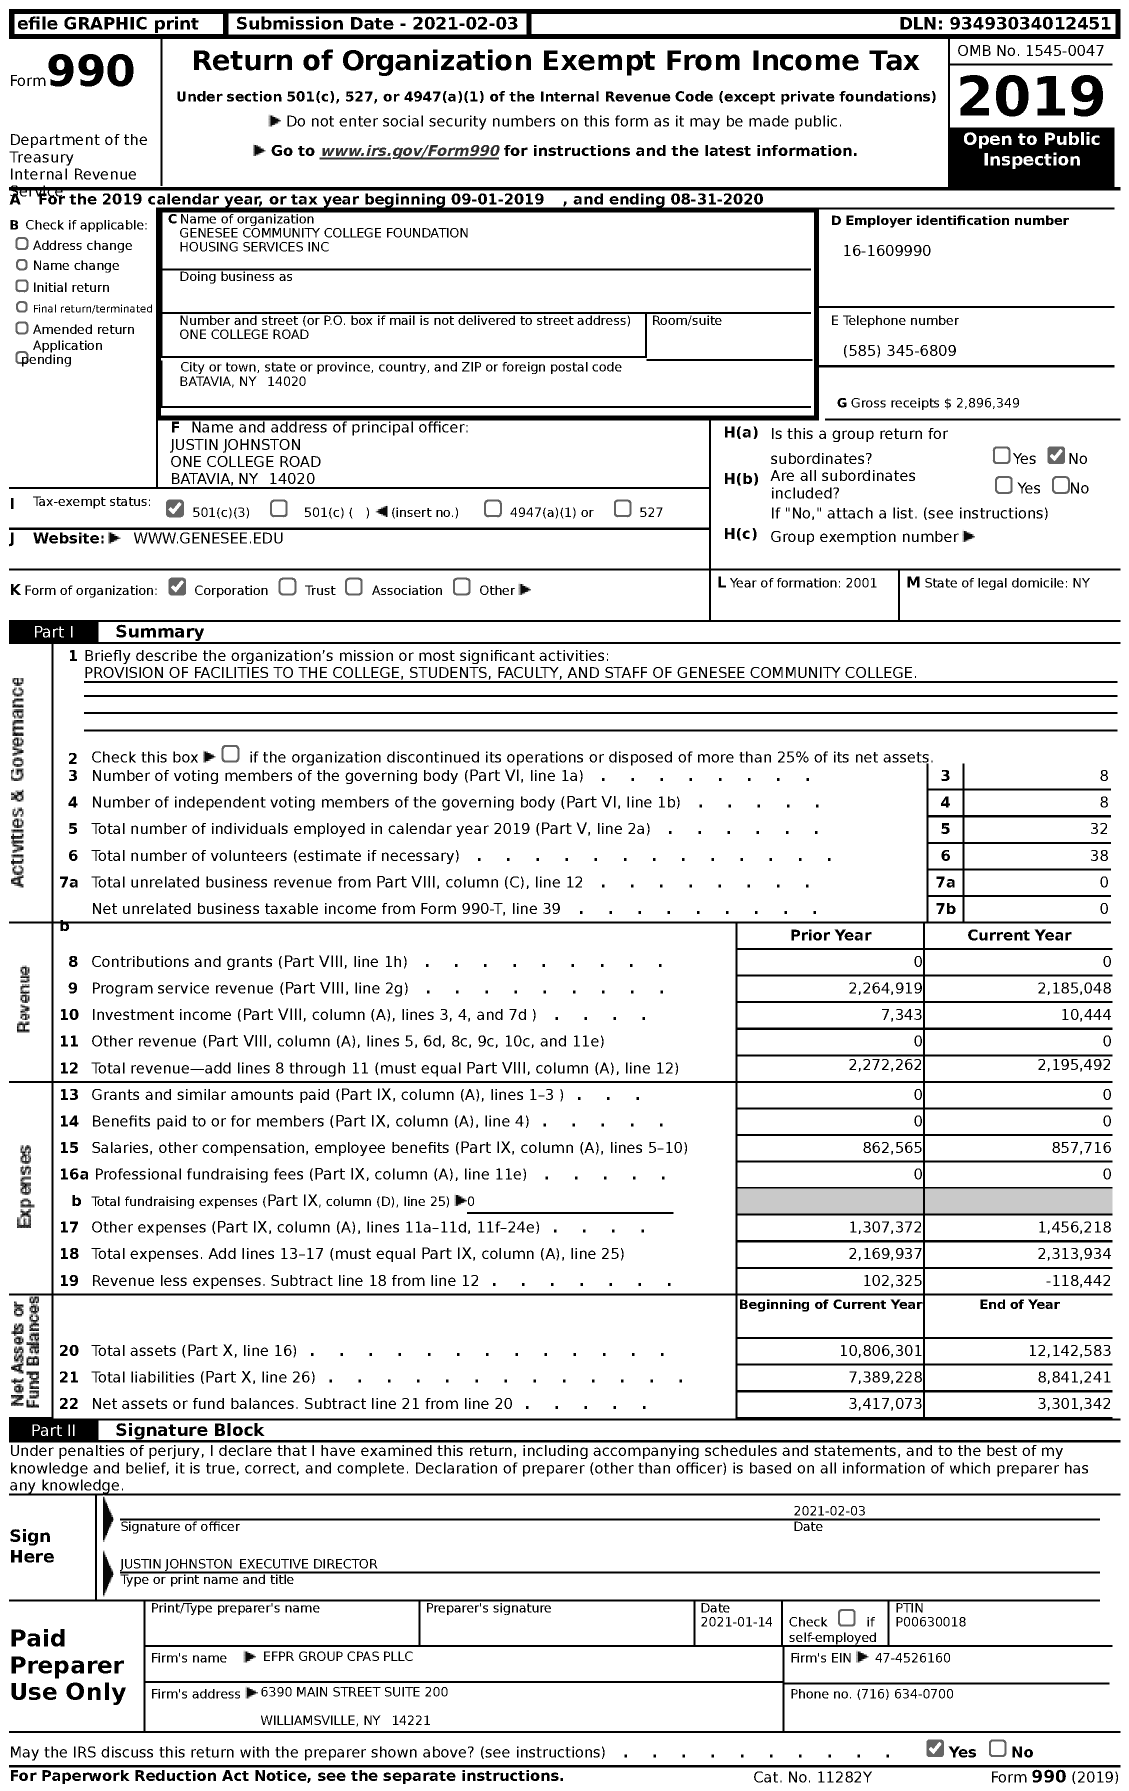 Image of first page of 2019 Form 990 for Genesee Community College Foundation Housing Services